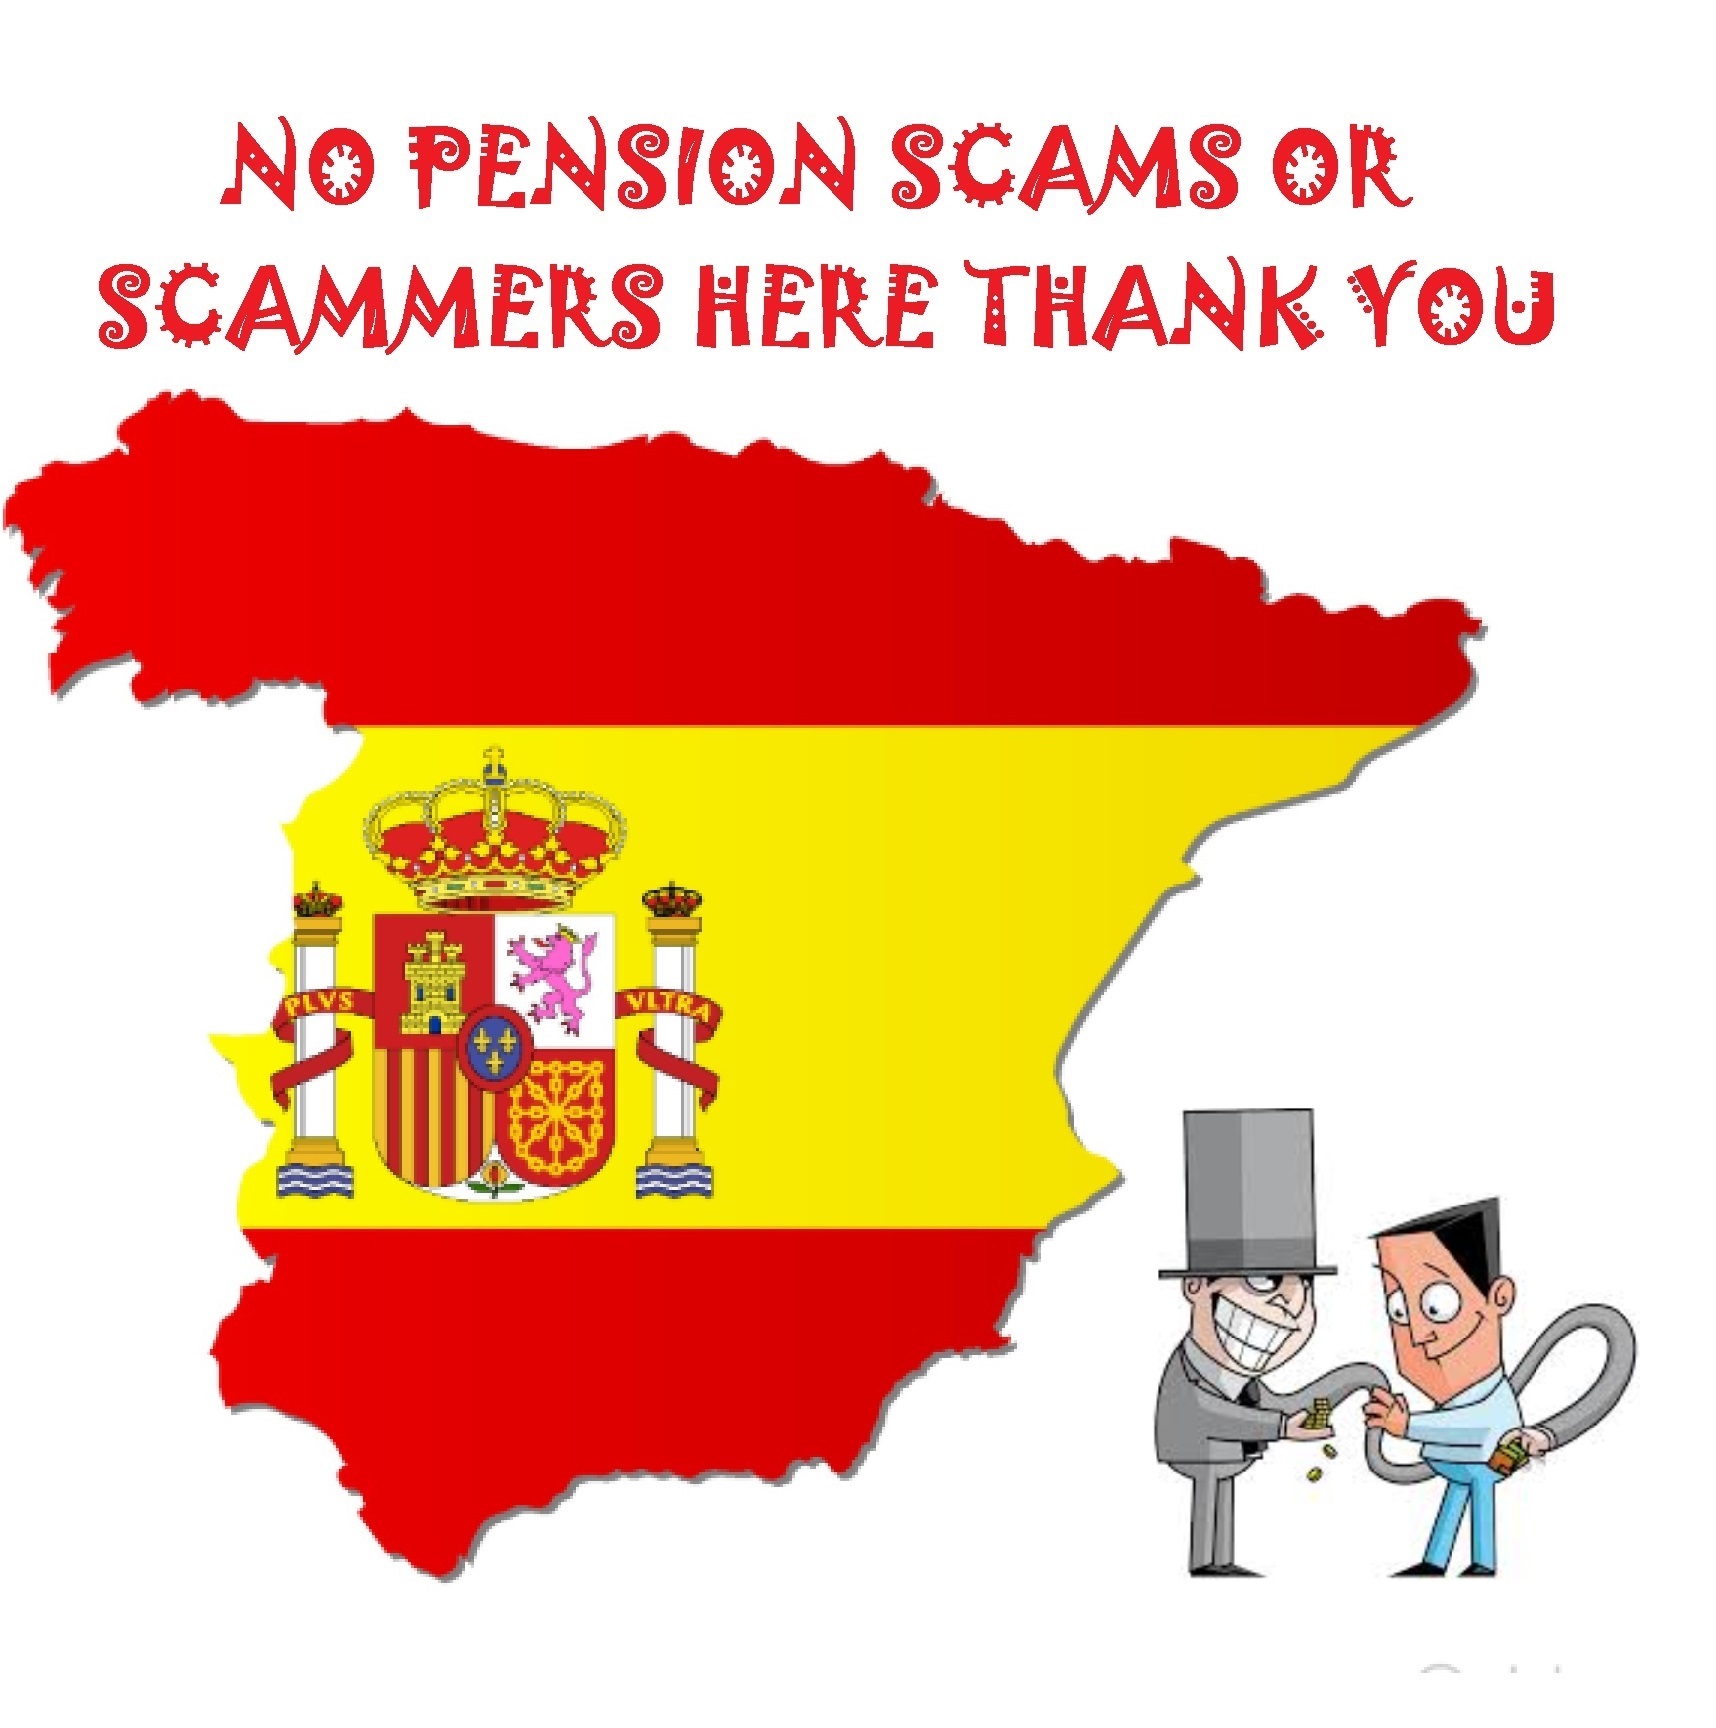 Pension scamming will hopefully be outlawed in Spain after the Continental Wealth Management criminal case.